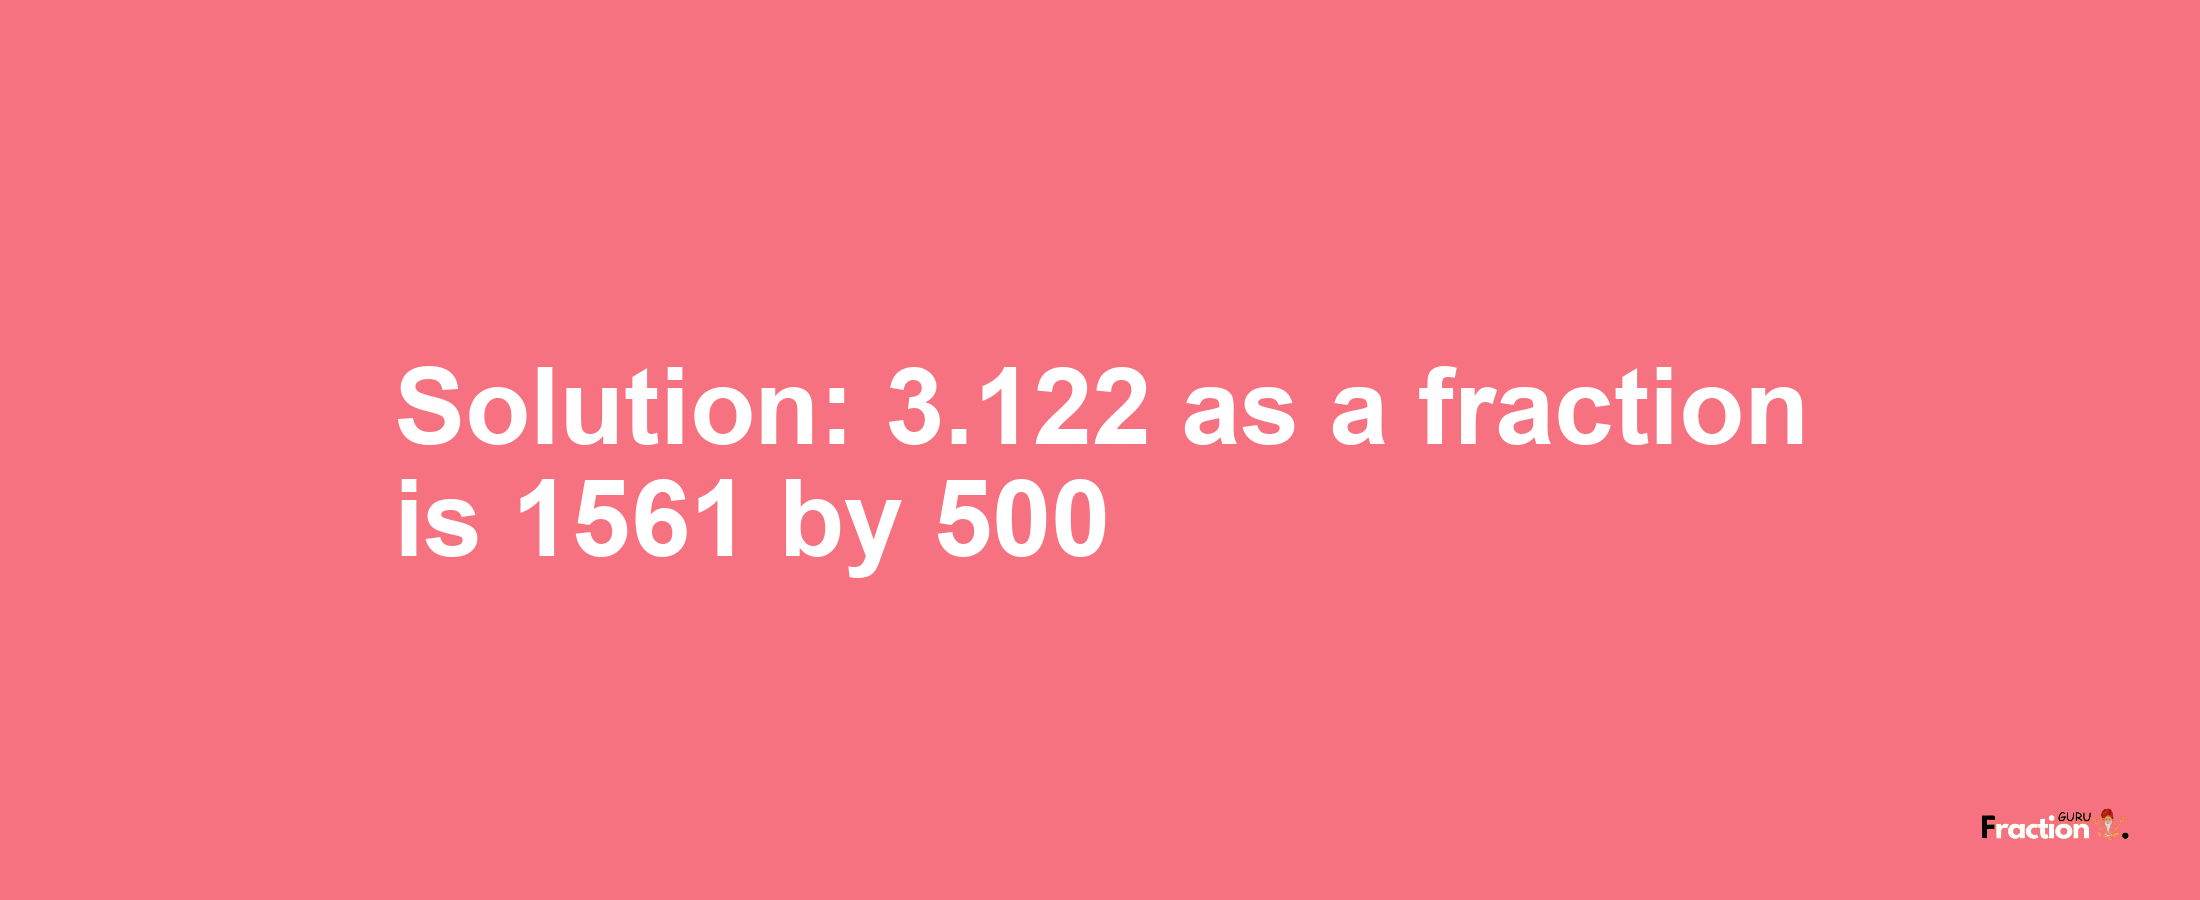 Solution:3.122 as a fraction is 1561/500